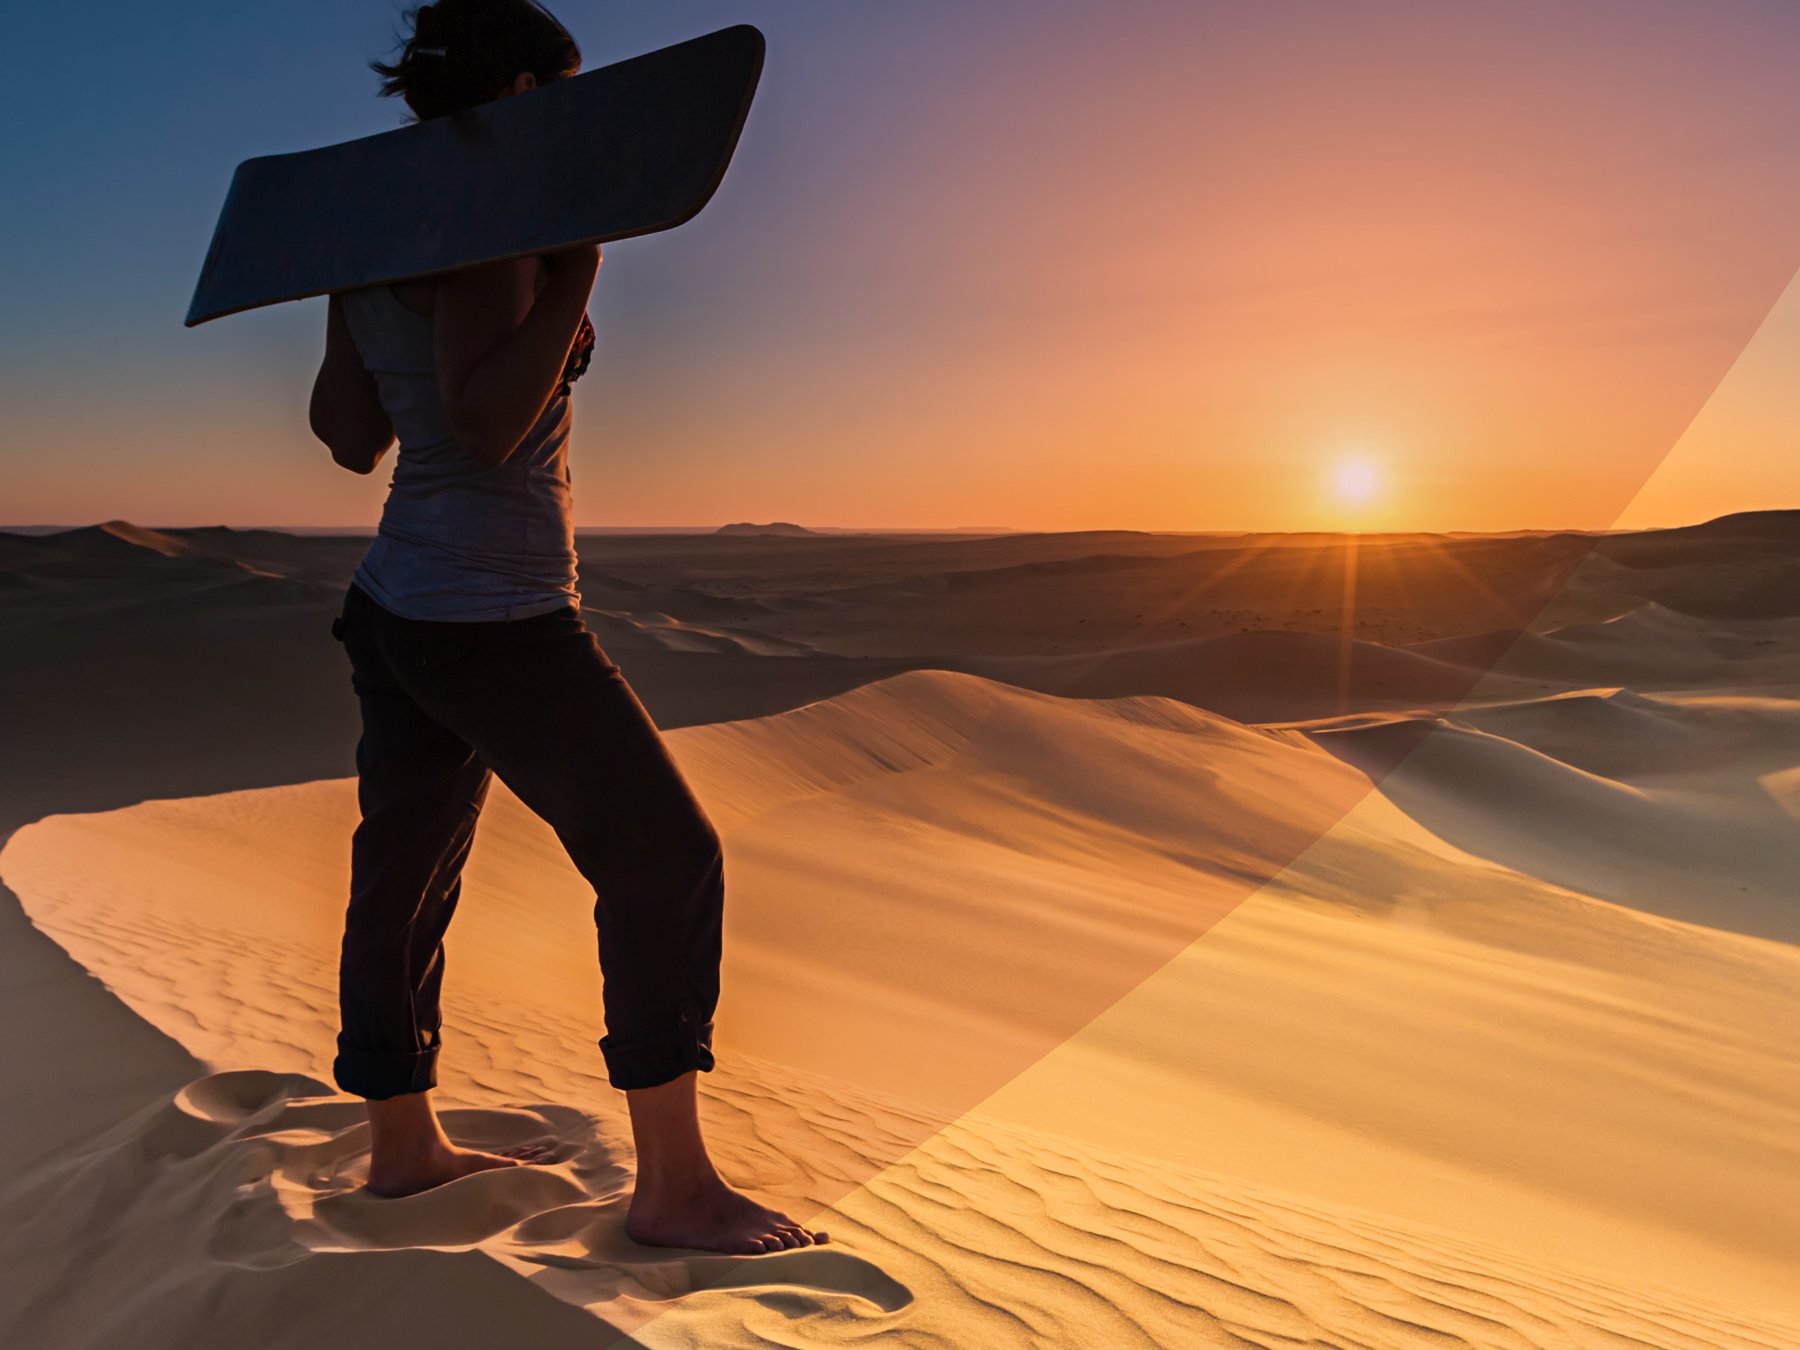 Young woman standing barefoot on sand dunes, holding a sandboard and watching the sunset in The Sahara Desert. Close-up.